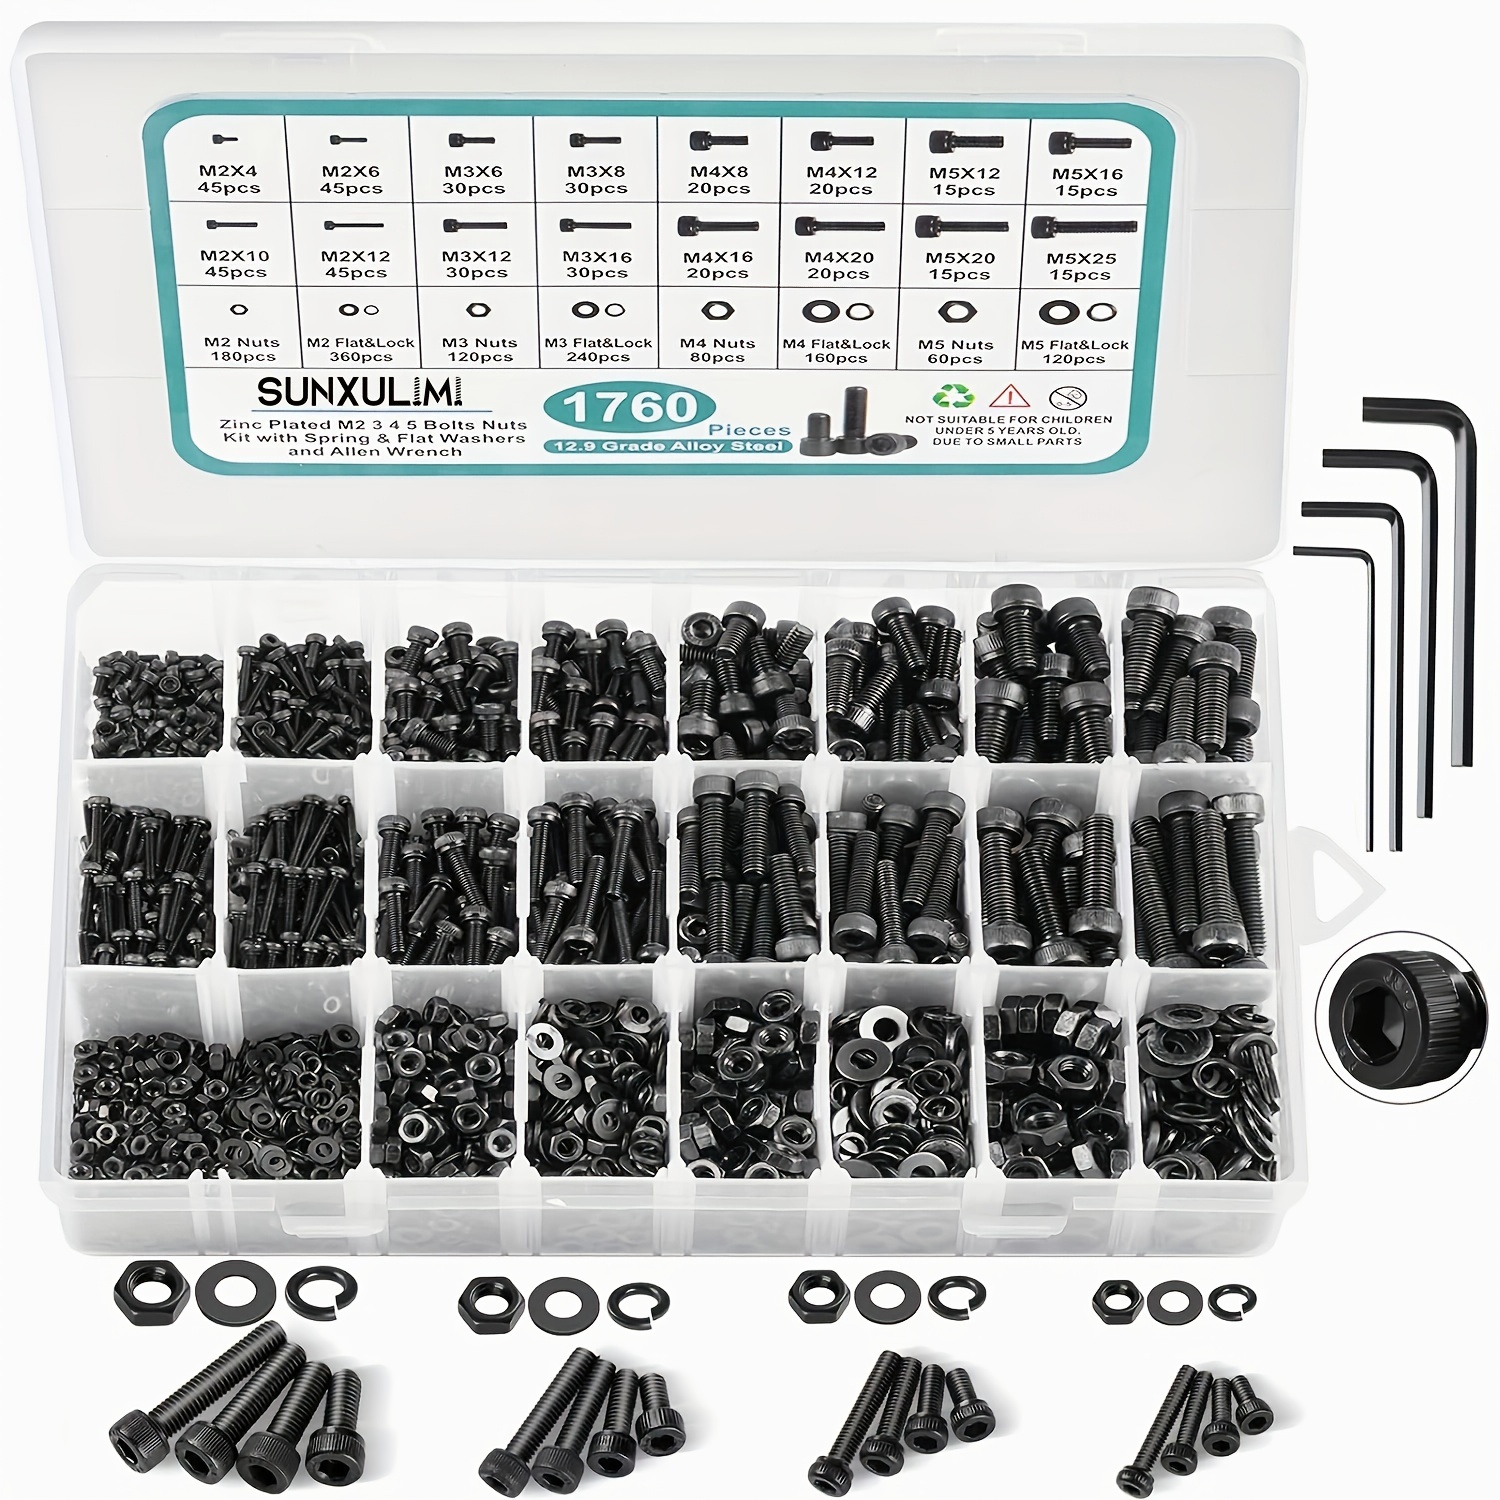 

1760pcs M2 M3 M4 M5 Metric Screw Assortment, Grade 12.9 Alloy Steel Hex Socket Head Cap Metric Bolts And Nuts Kit, Black Zinc Plated And Anti Rust Upgrade Metric Screw Set With 4 Pcs Hex Wrenches